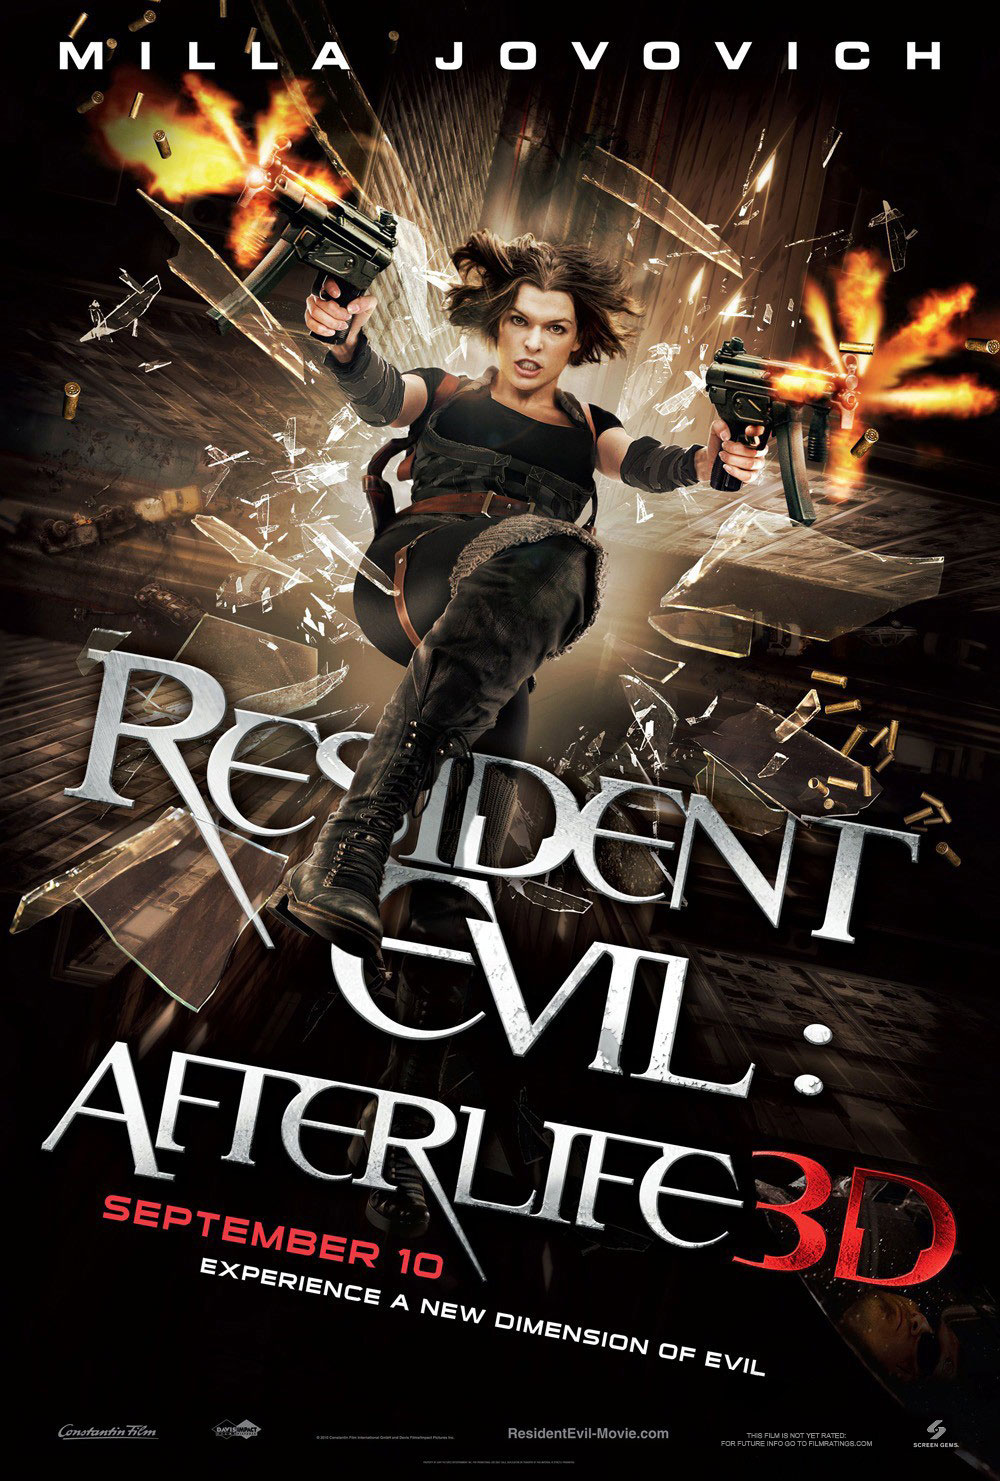 Resident Evil: The Final Chapter - Extras, Movie Morgue Wiki